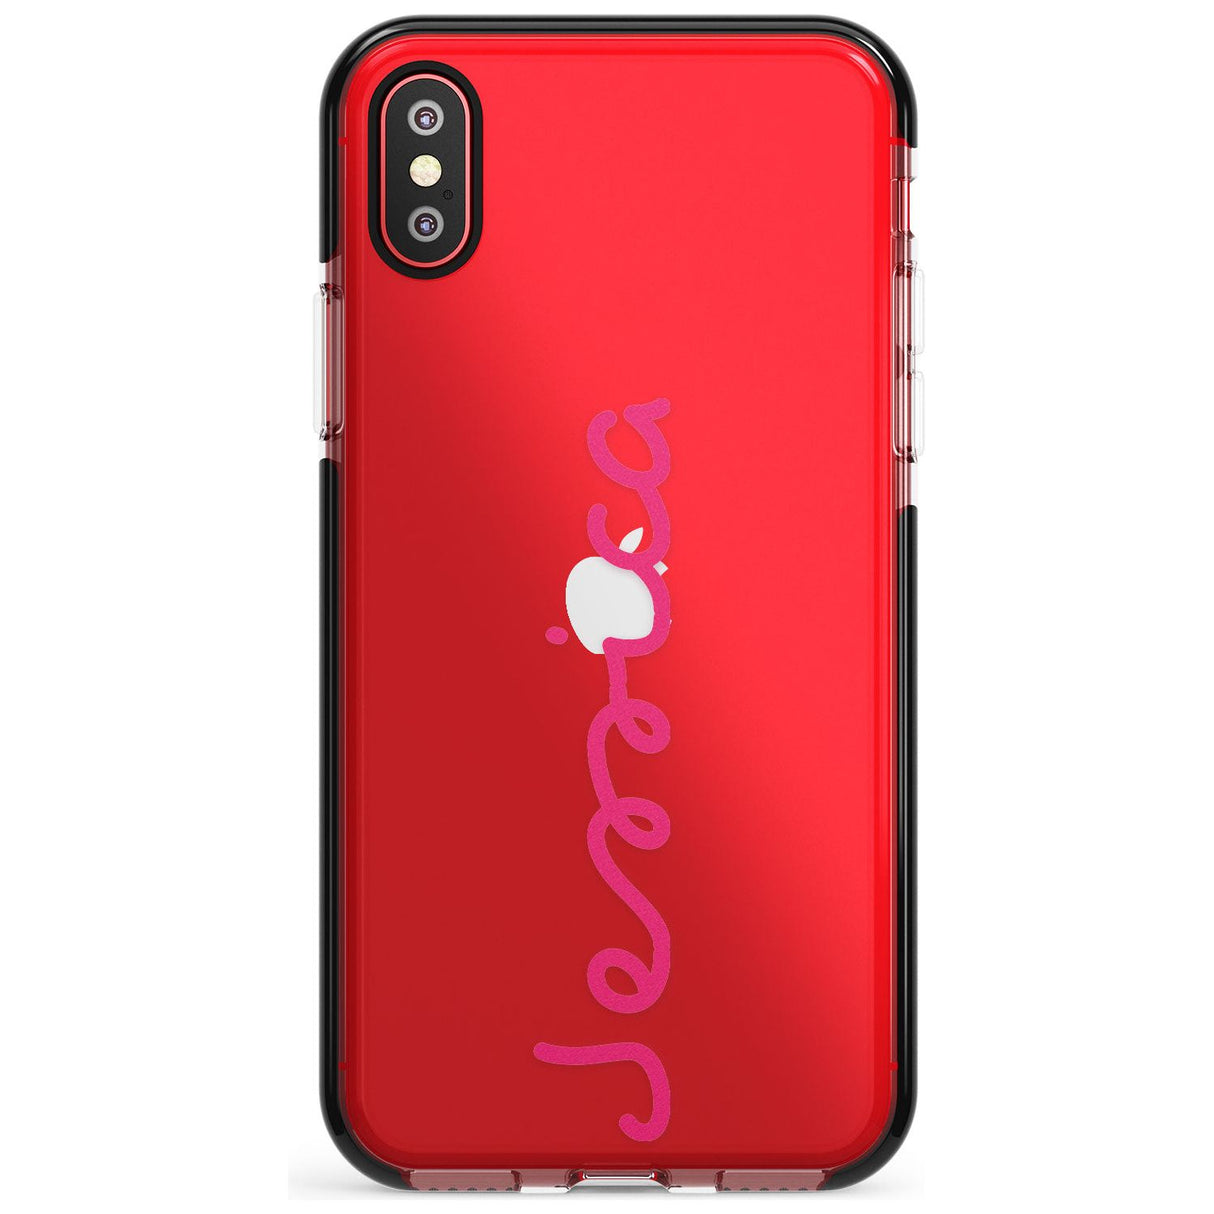 Personalised Summer Name Black Impact Phone Case for iPhone X XS Max XR